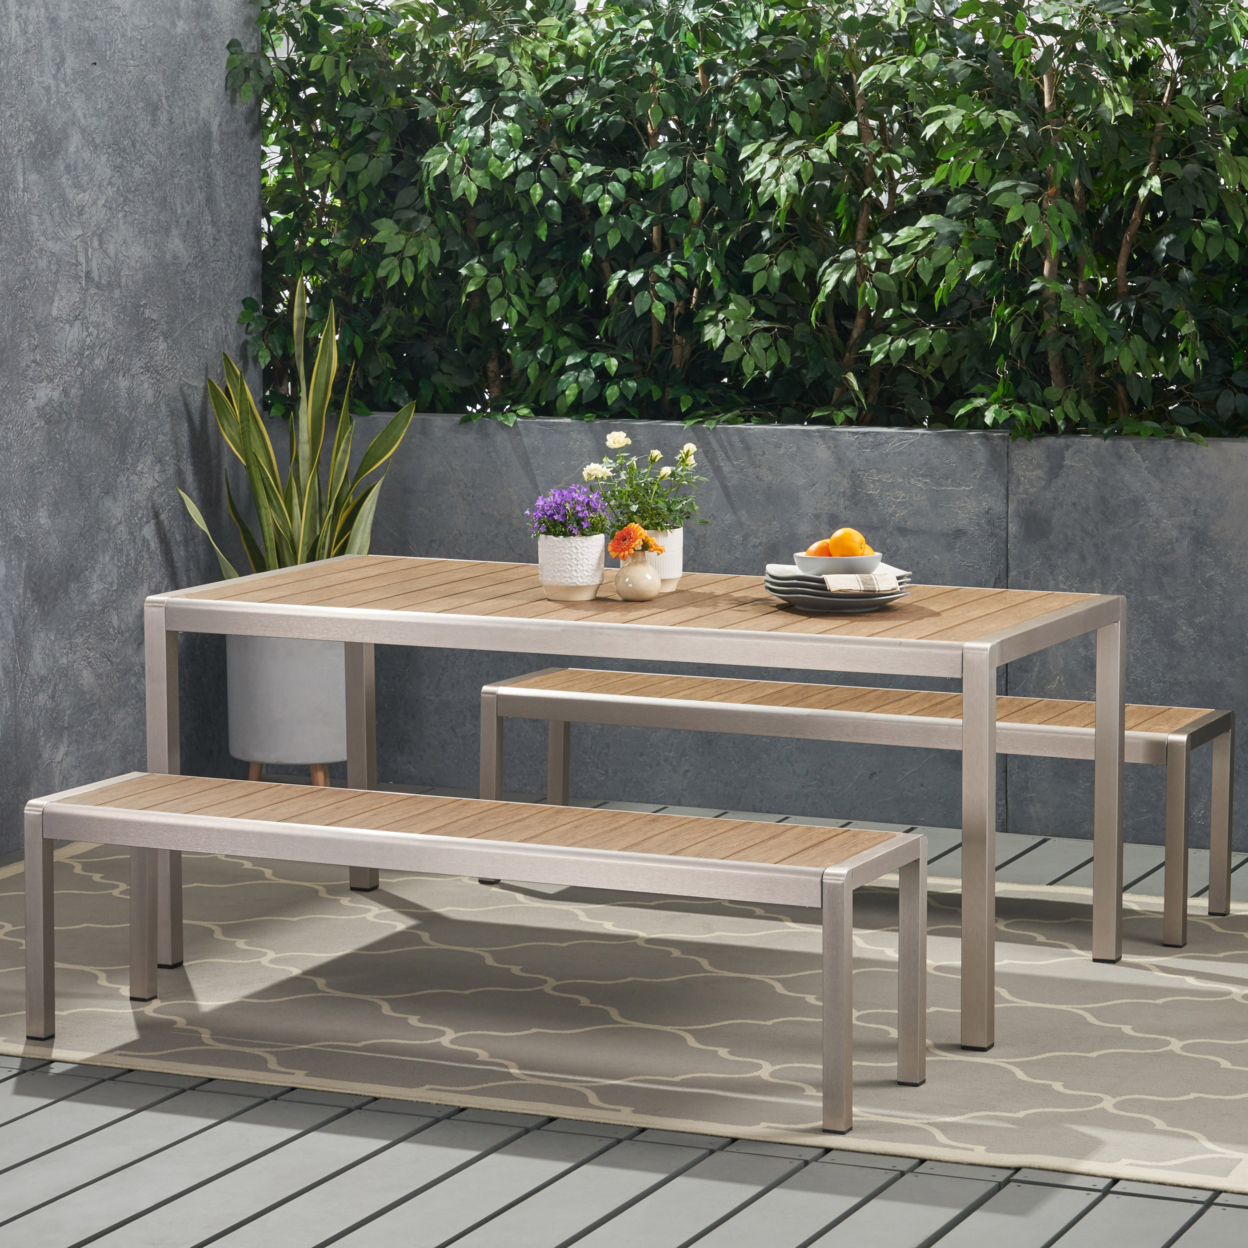 Odelette Outdoor Modern Aluminum Picnic Dining Set With Dining Benches - Natural Finish + Silver